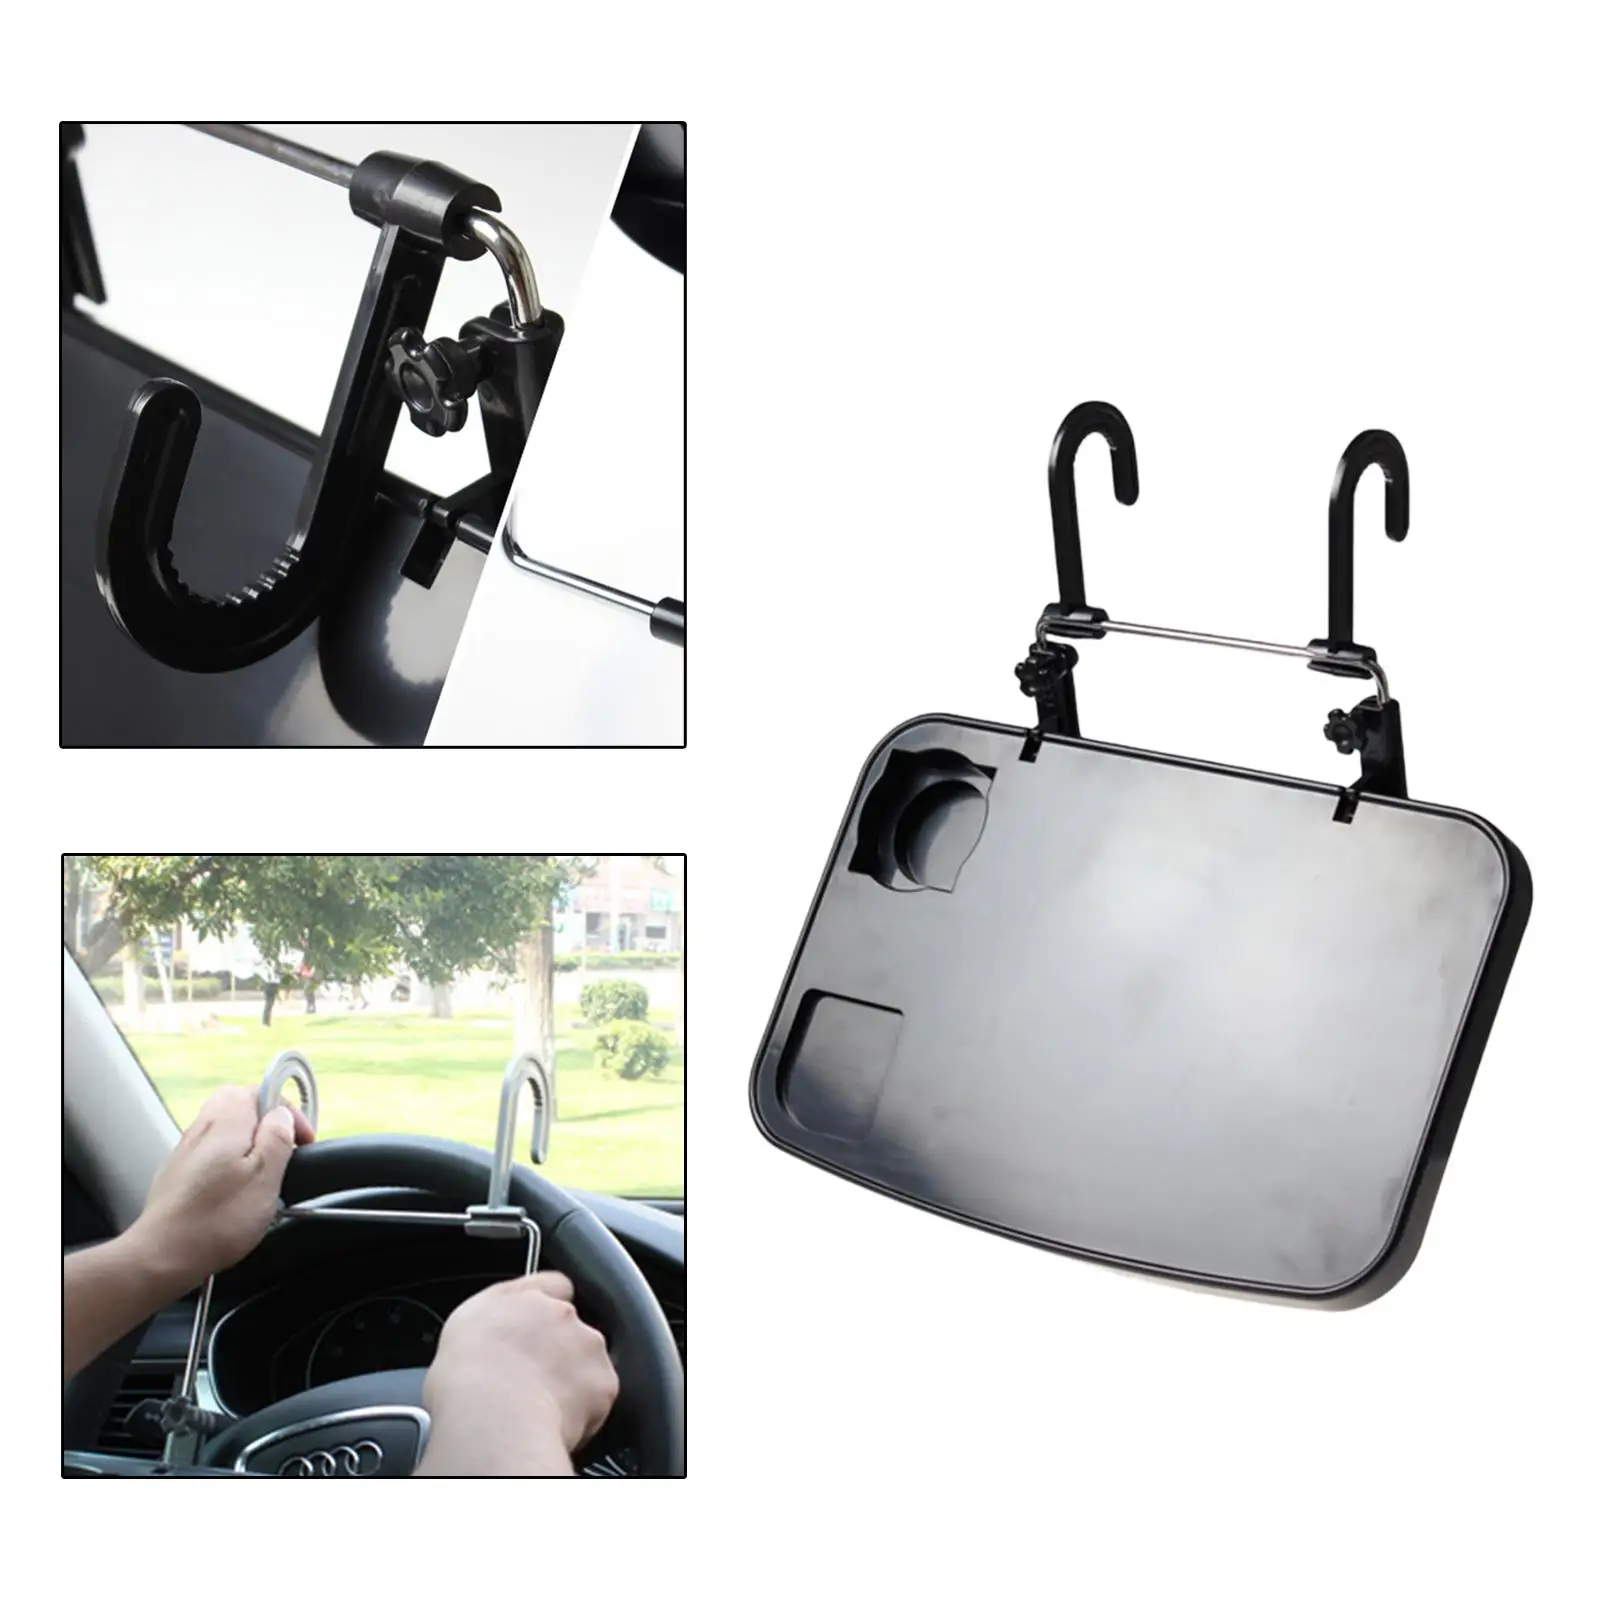 Car Computer Rack Portable Cup Holder Desk Table Table Holder Stand Fit for Notebook